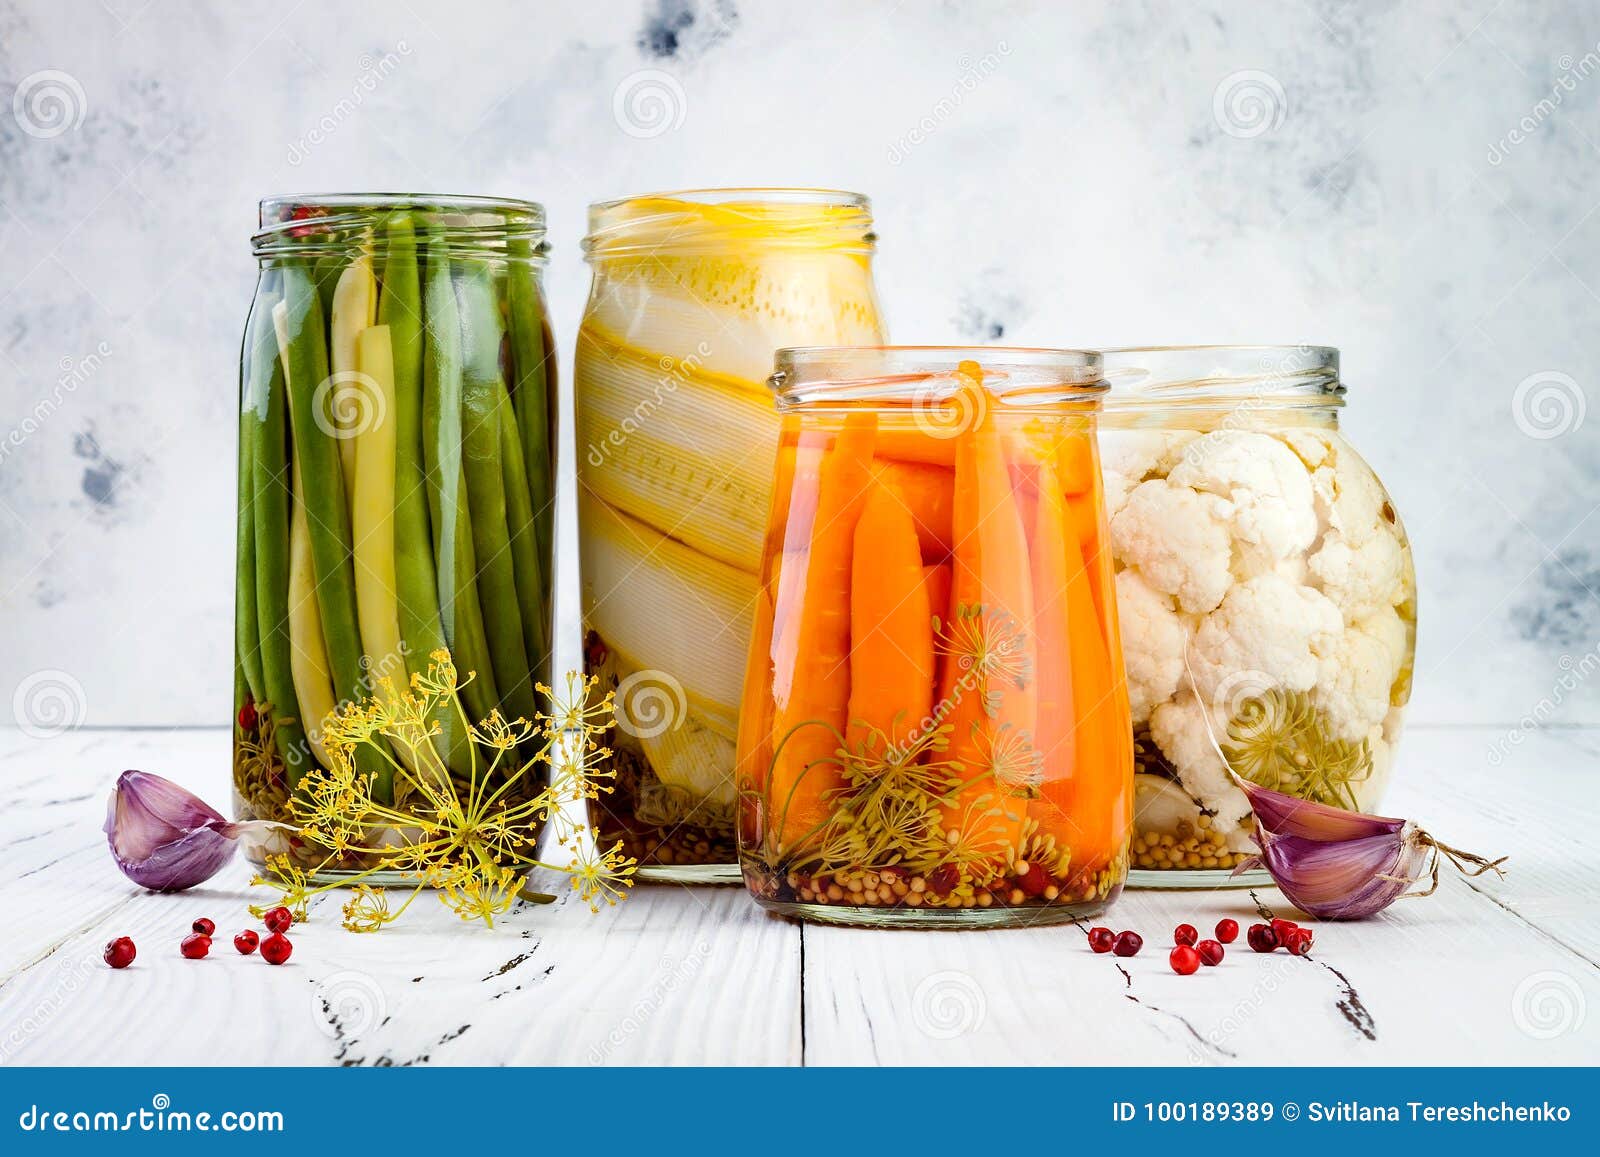 marinated pickles variety preserving jars. homemade green beans, squash, carrots, cauliflower pickles. fermented food